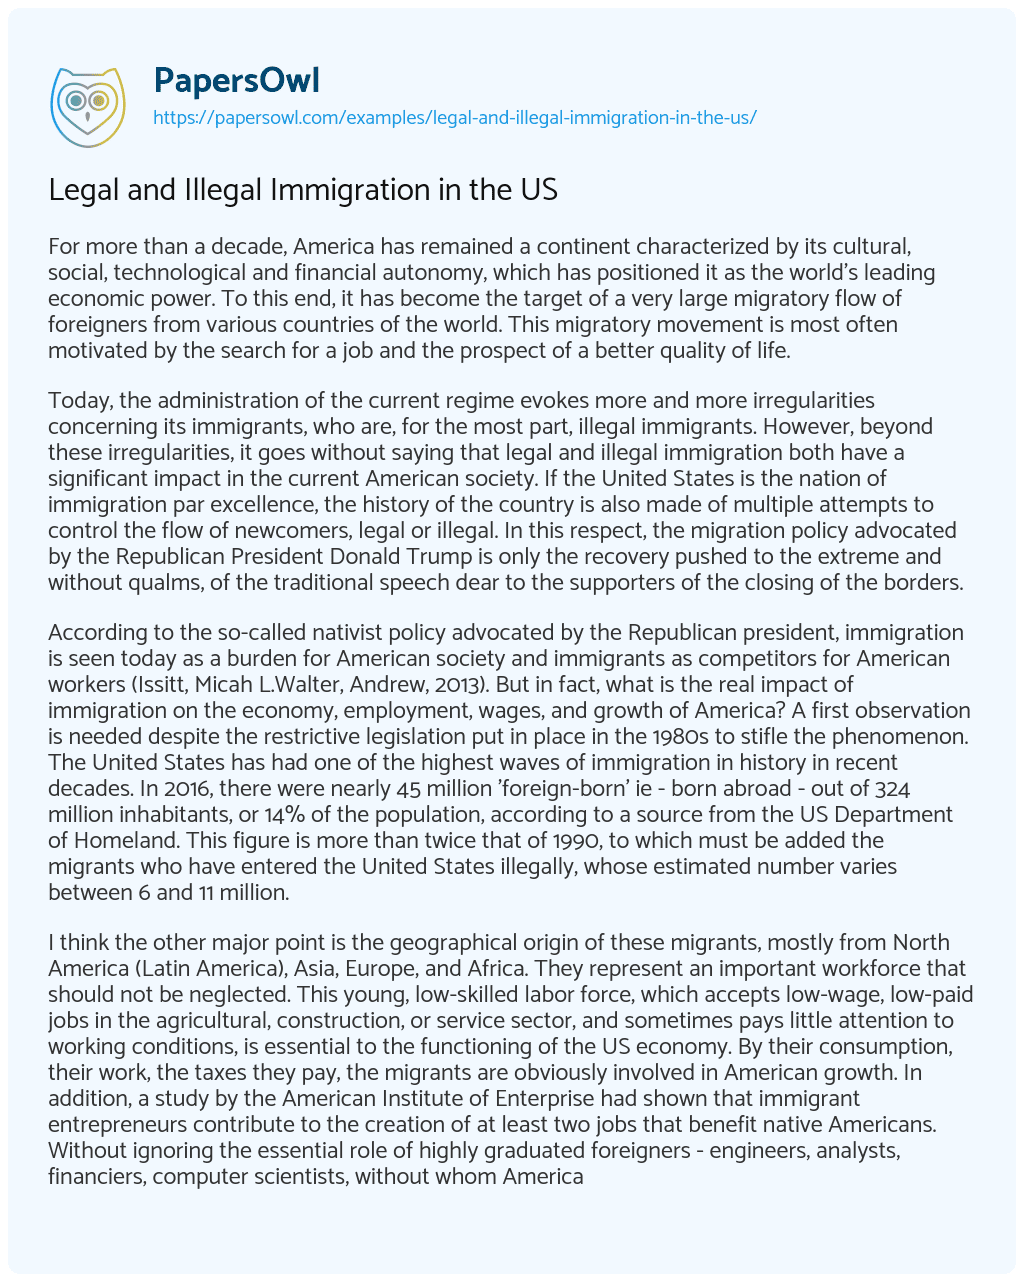 Essay on Legal and Illegal Immigration in the US